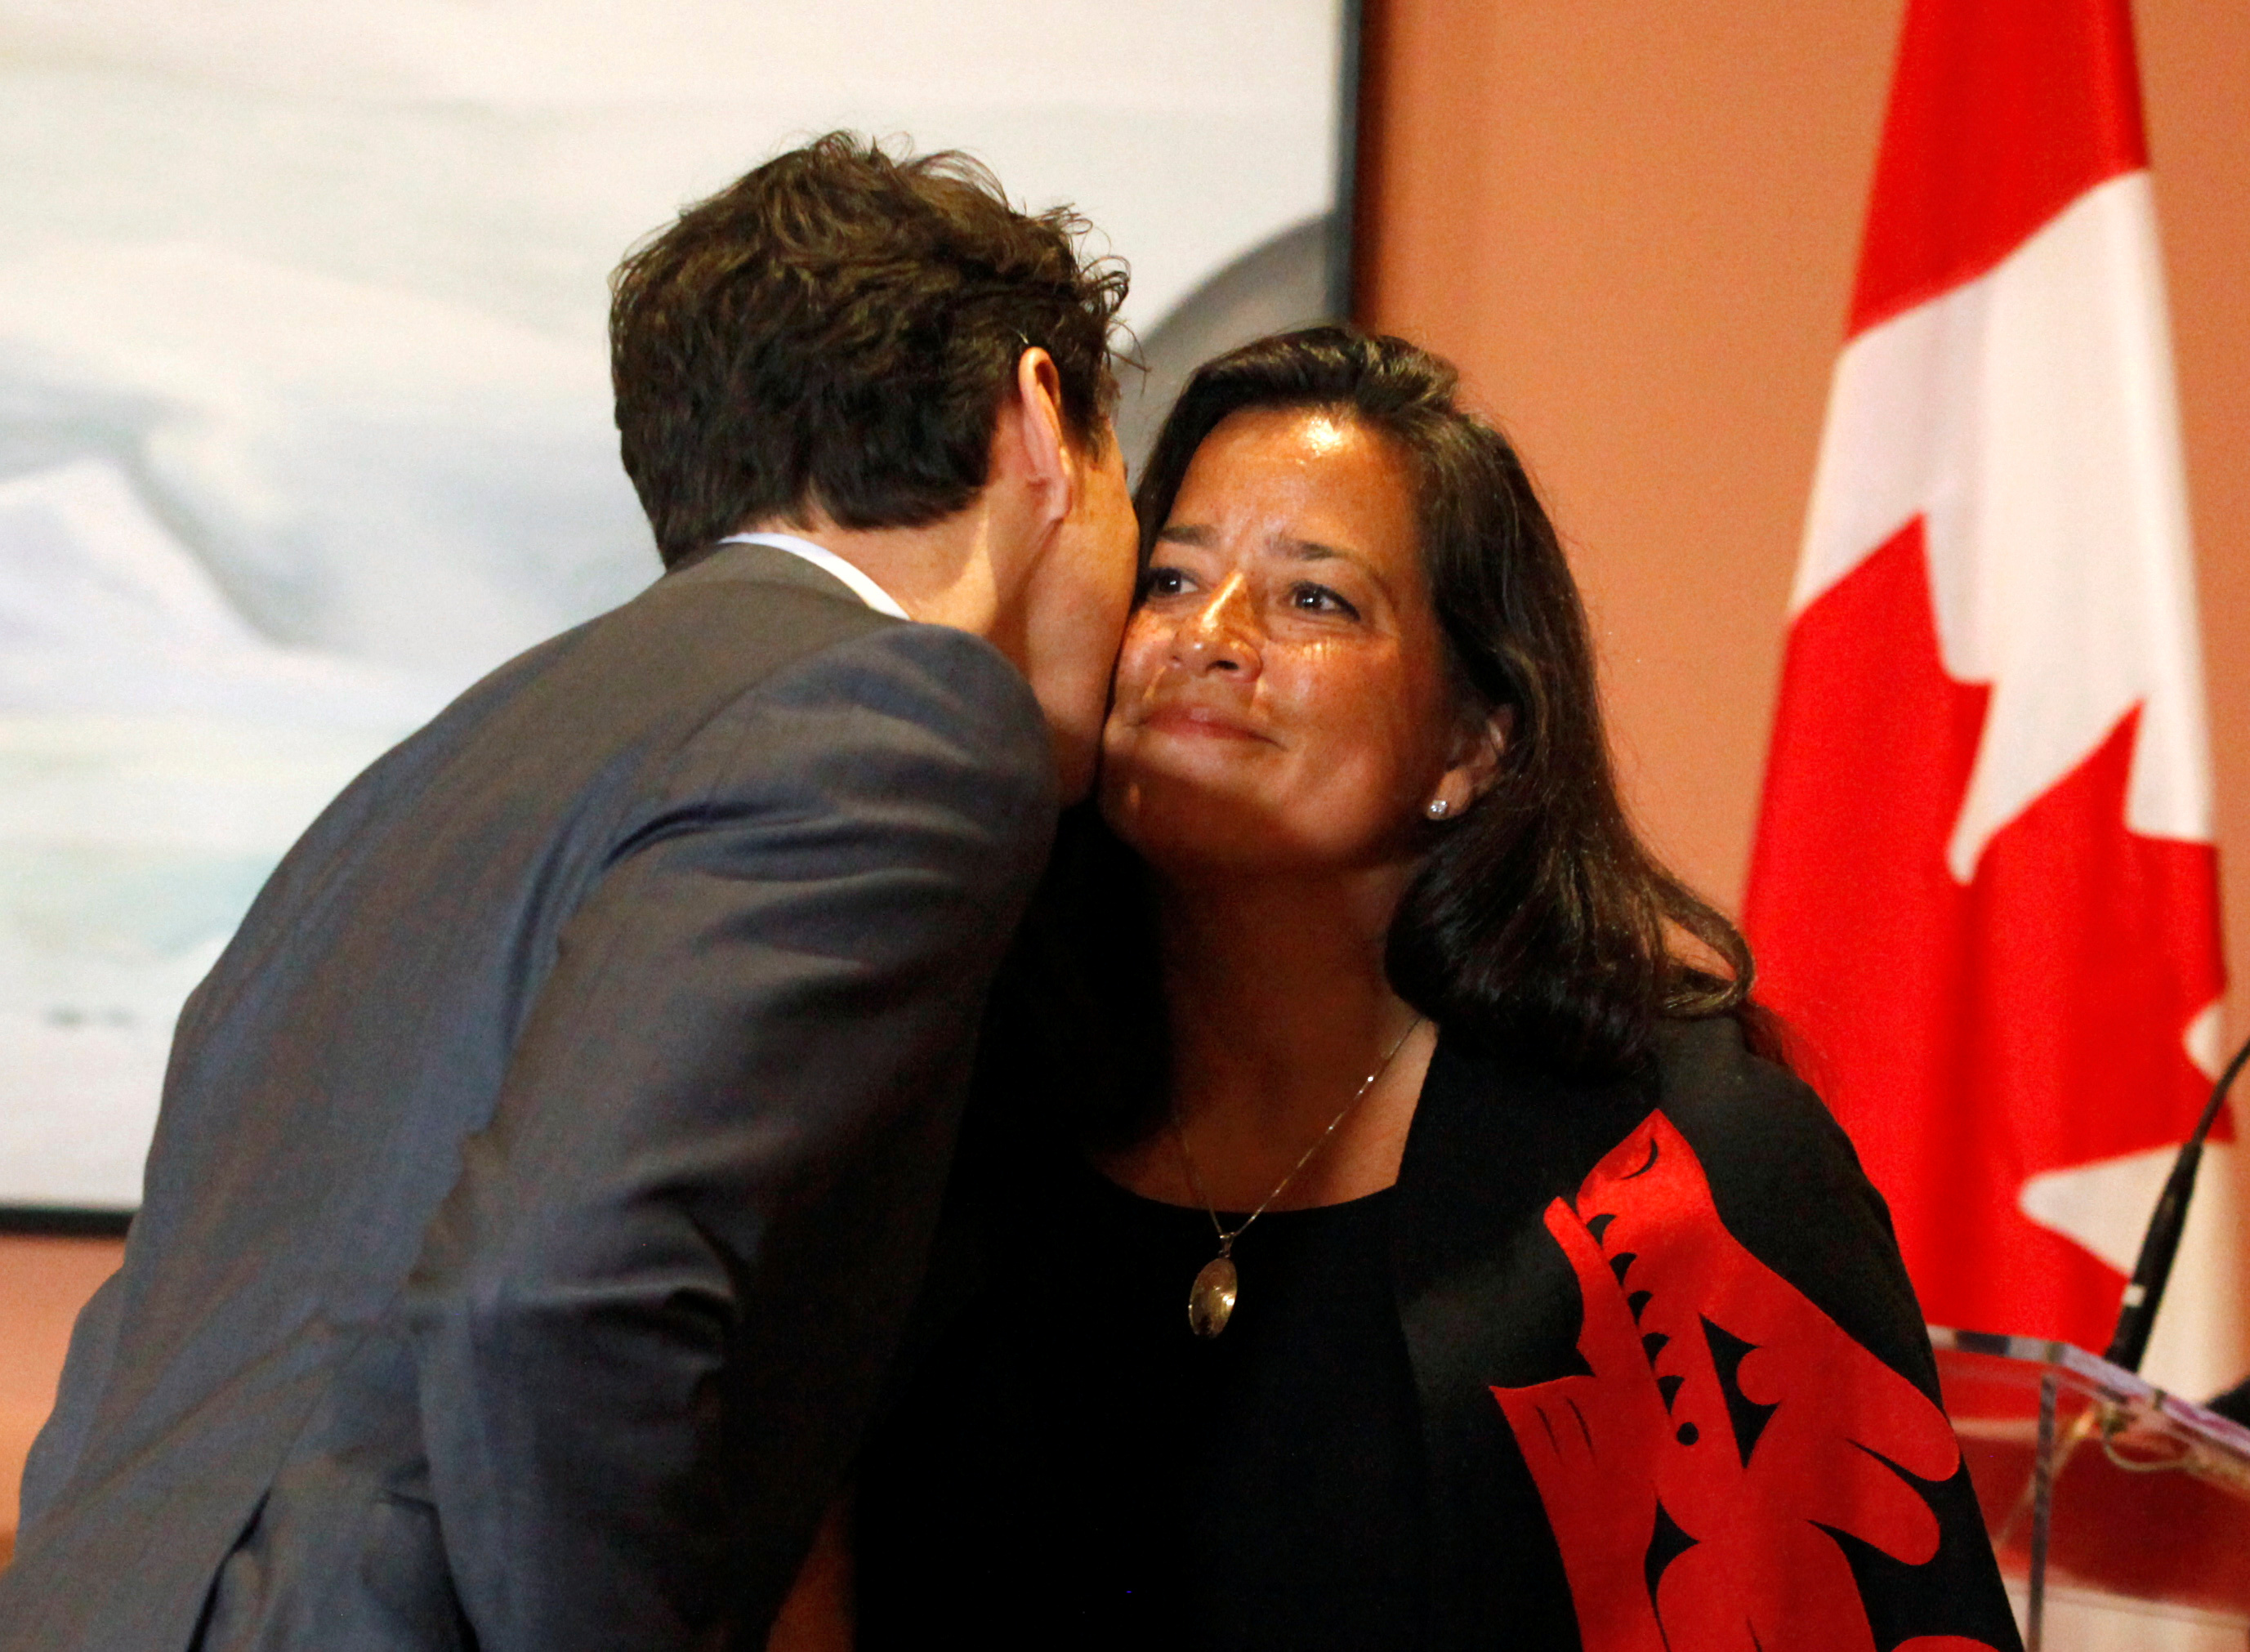 Newly appointed Canadian Veterans Affairs Minister Jody Wilson-Raybould is kissed by Prime Minister Justin Trudeau as he shuffles his cabinet after the surprise resignation of Treasury Board President Scott Brison, in Ottawa, Ontario, Canada, January 14, 2019. Picture taken January 14, 2019. REUTERS/Patrick Doyle